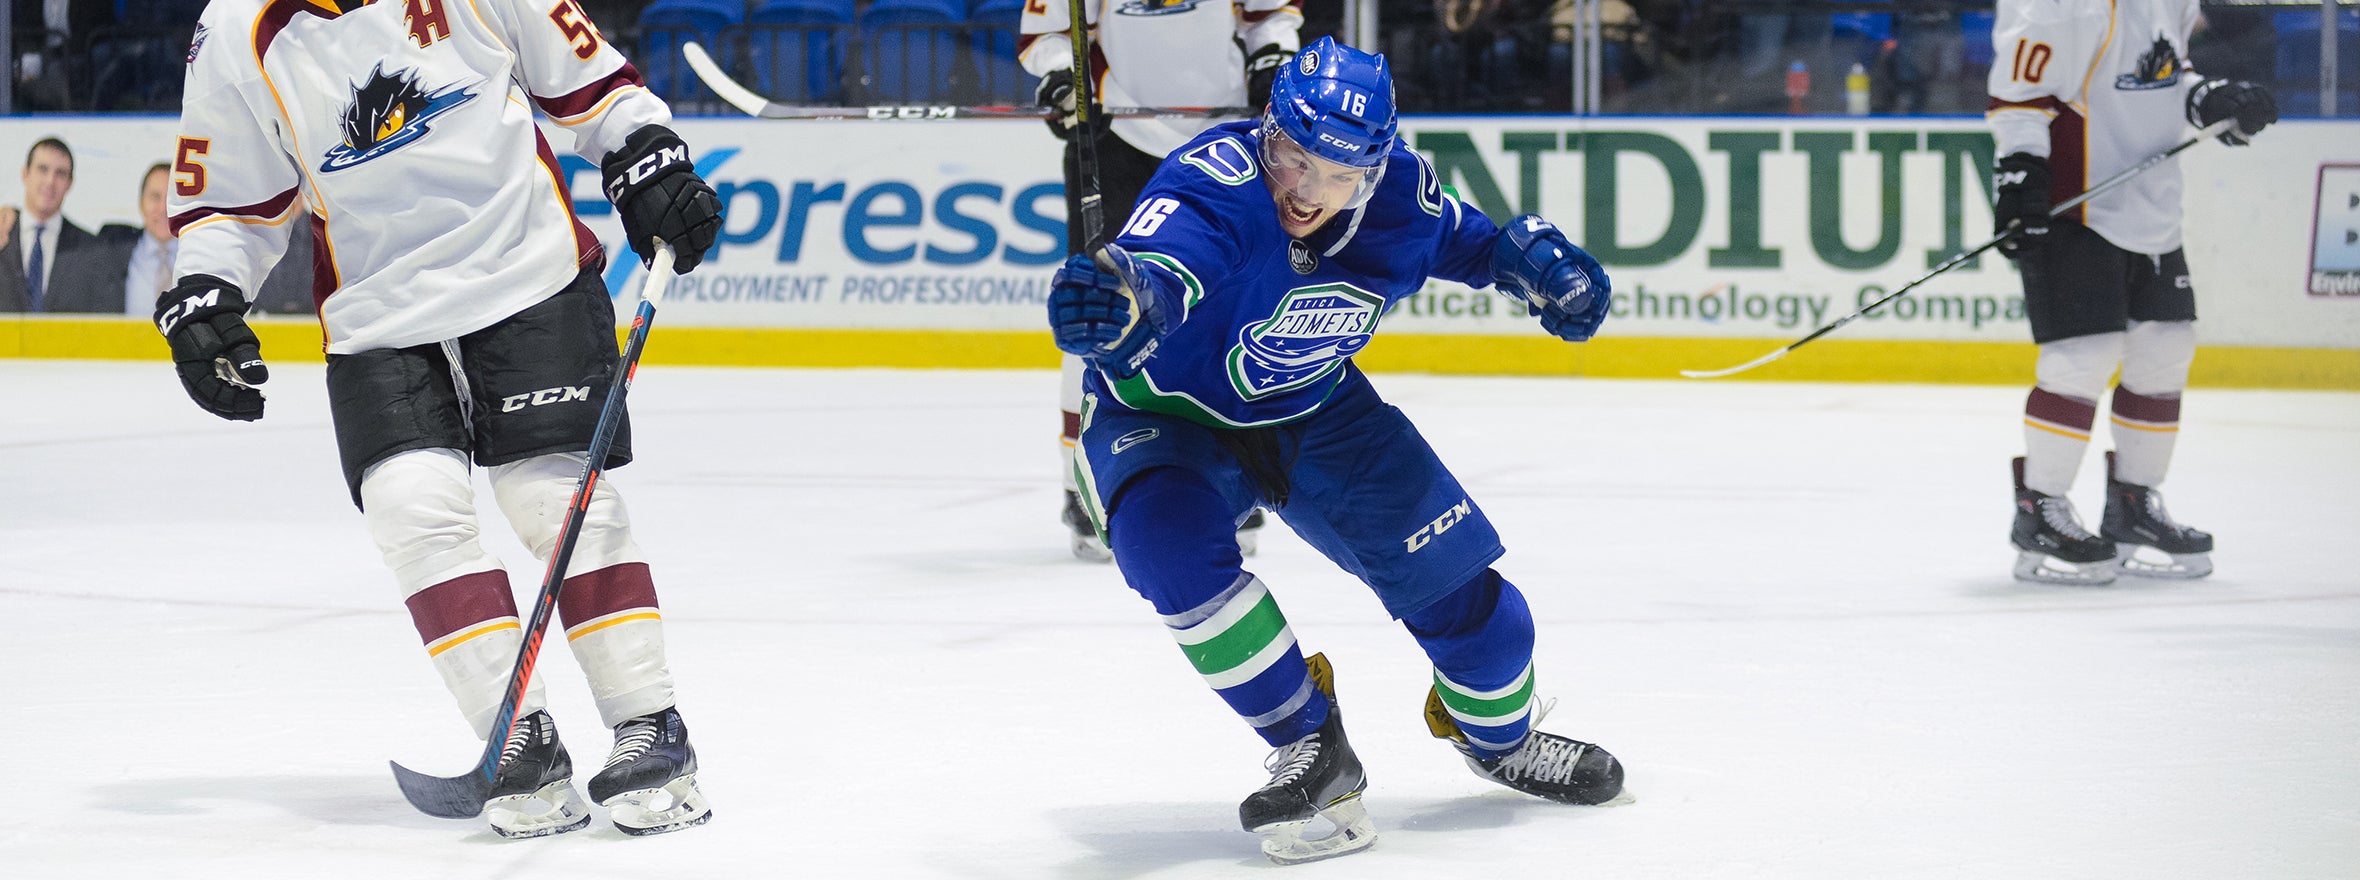 COMETS SCARE OFF MONSTERS IN OVERTIME THRILLER